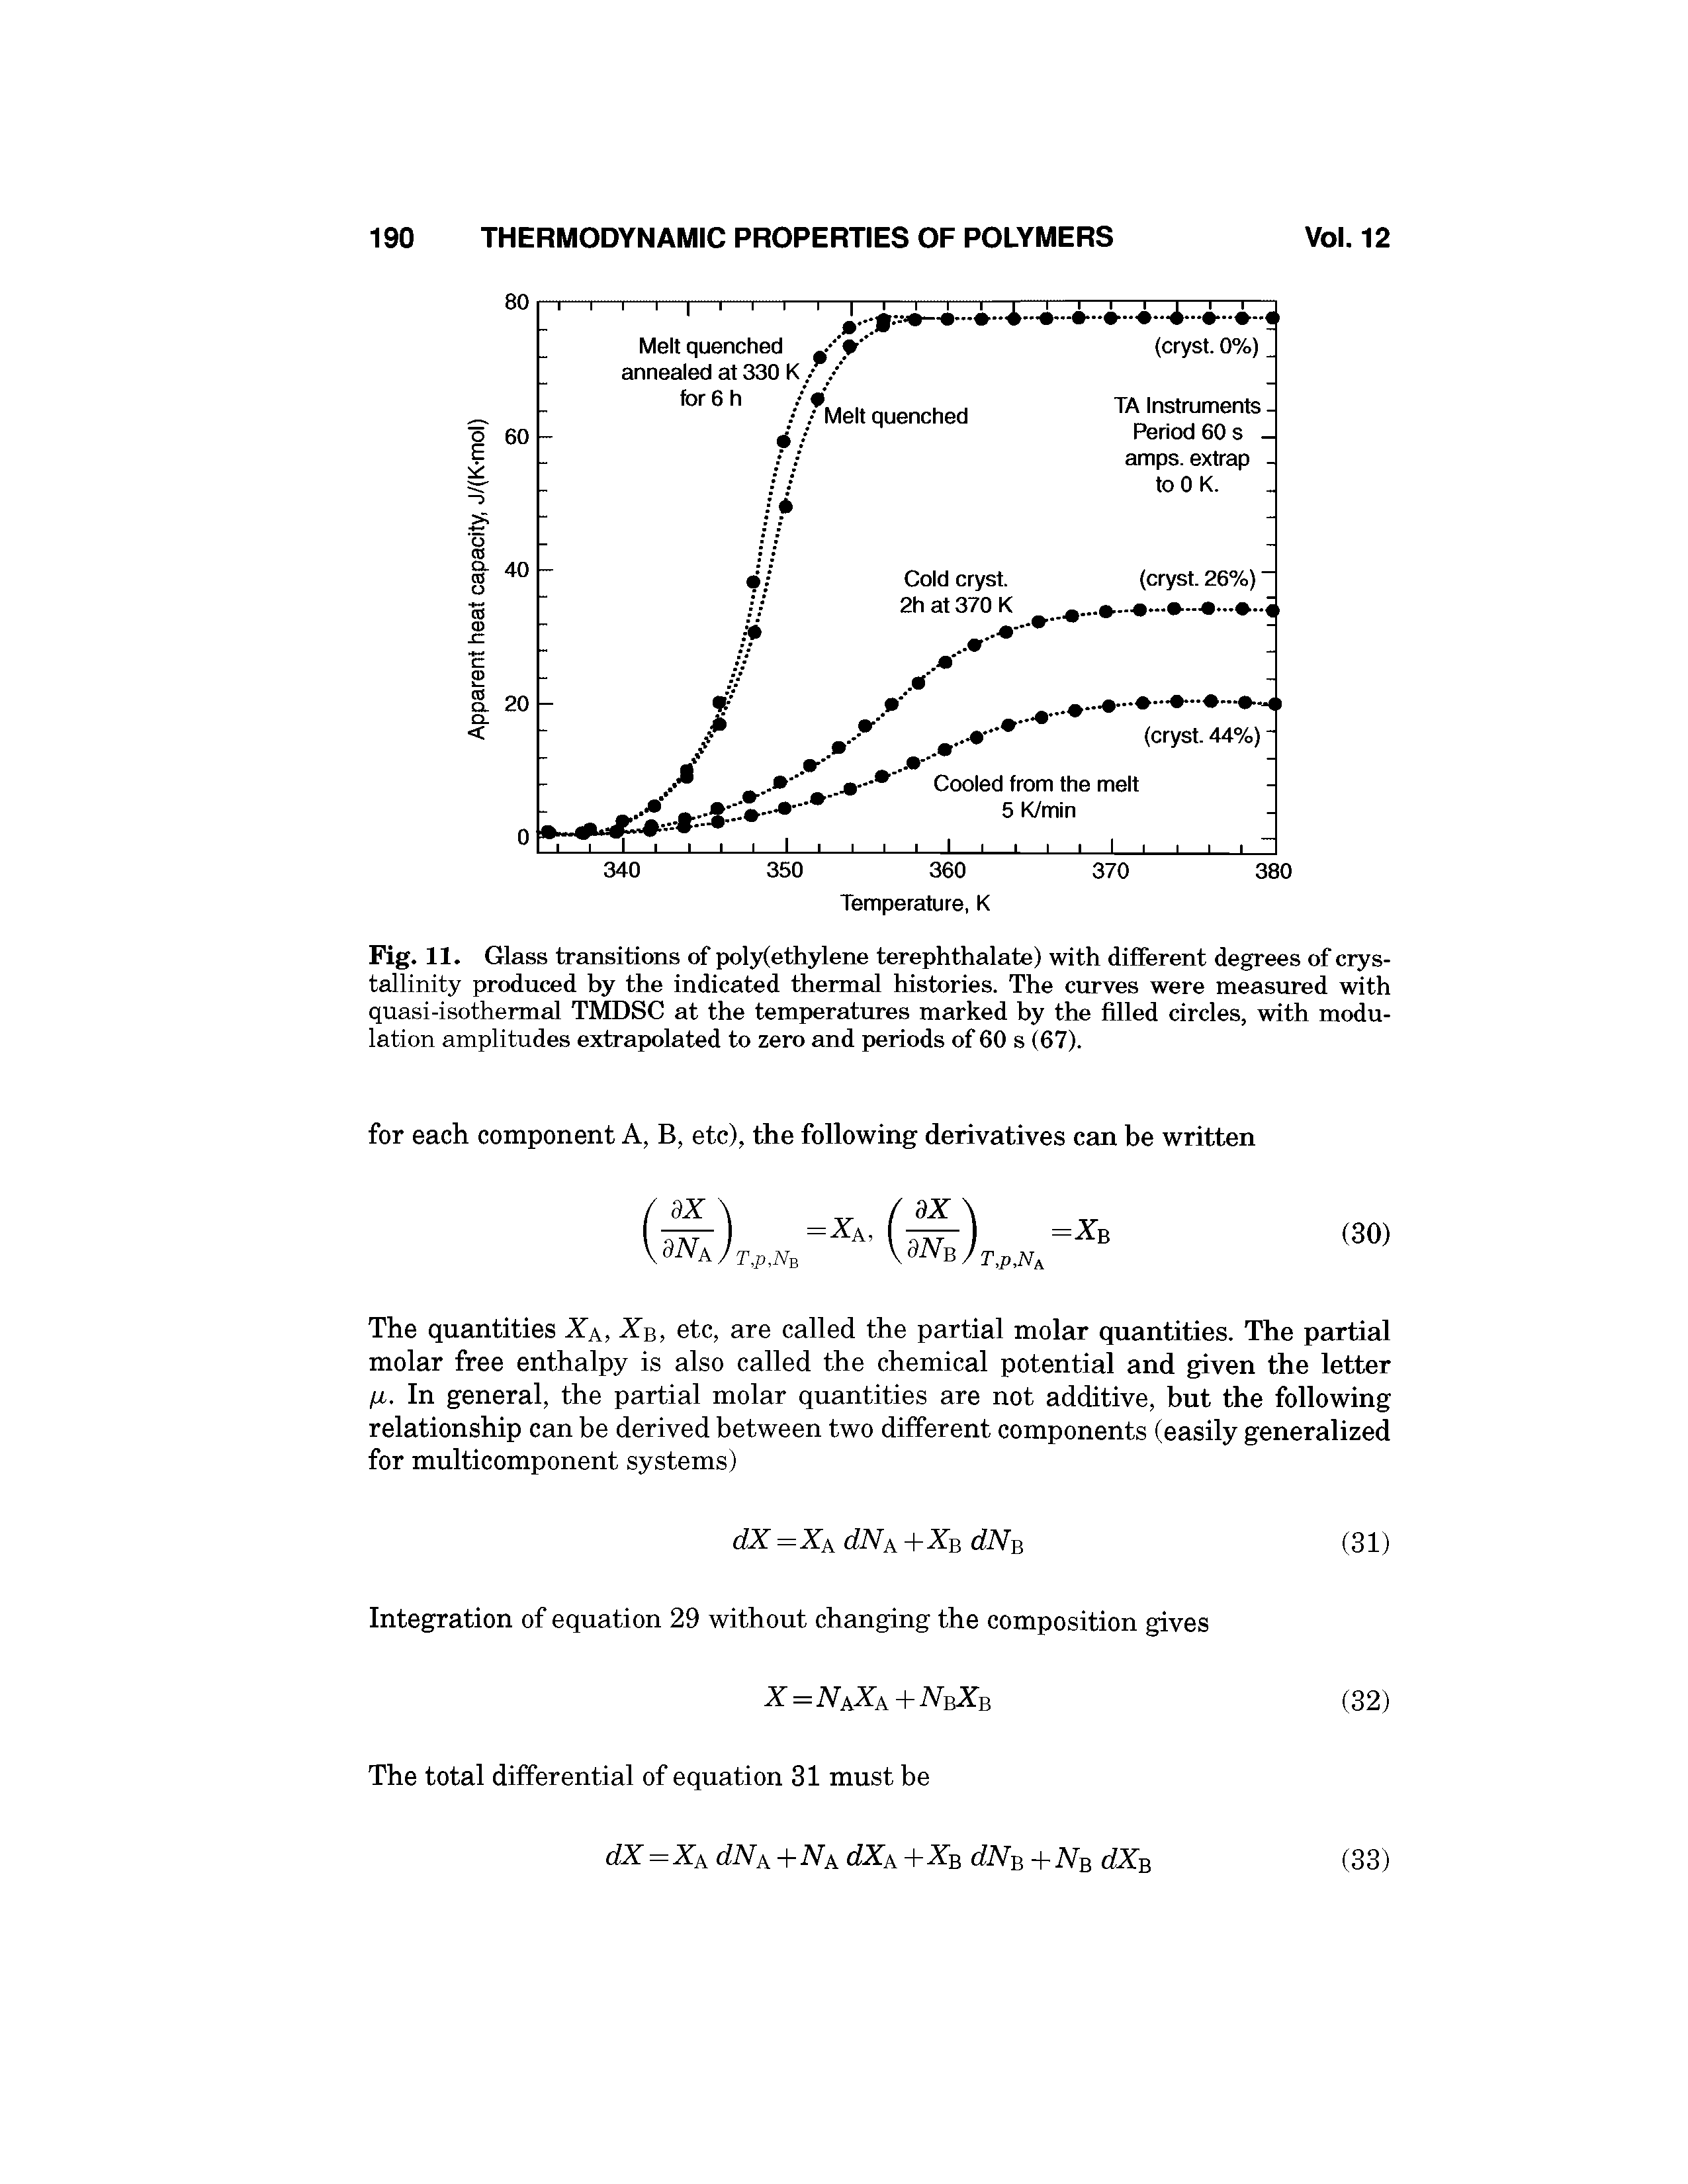 Fig. 11. Glass transitions of poly(ethylene terephthalate) with different degrees of crystallinity produced by the indicated thermal histories. The curves were measured with quasi-isothermal TMDSC at the temperatures marked by the filled circles, with modulation amplitudes extrapolated to zero and periods of 60 s (67).